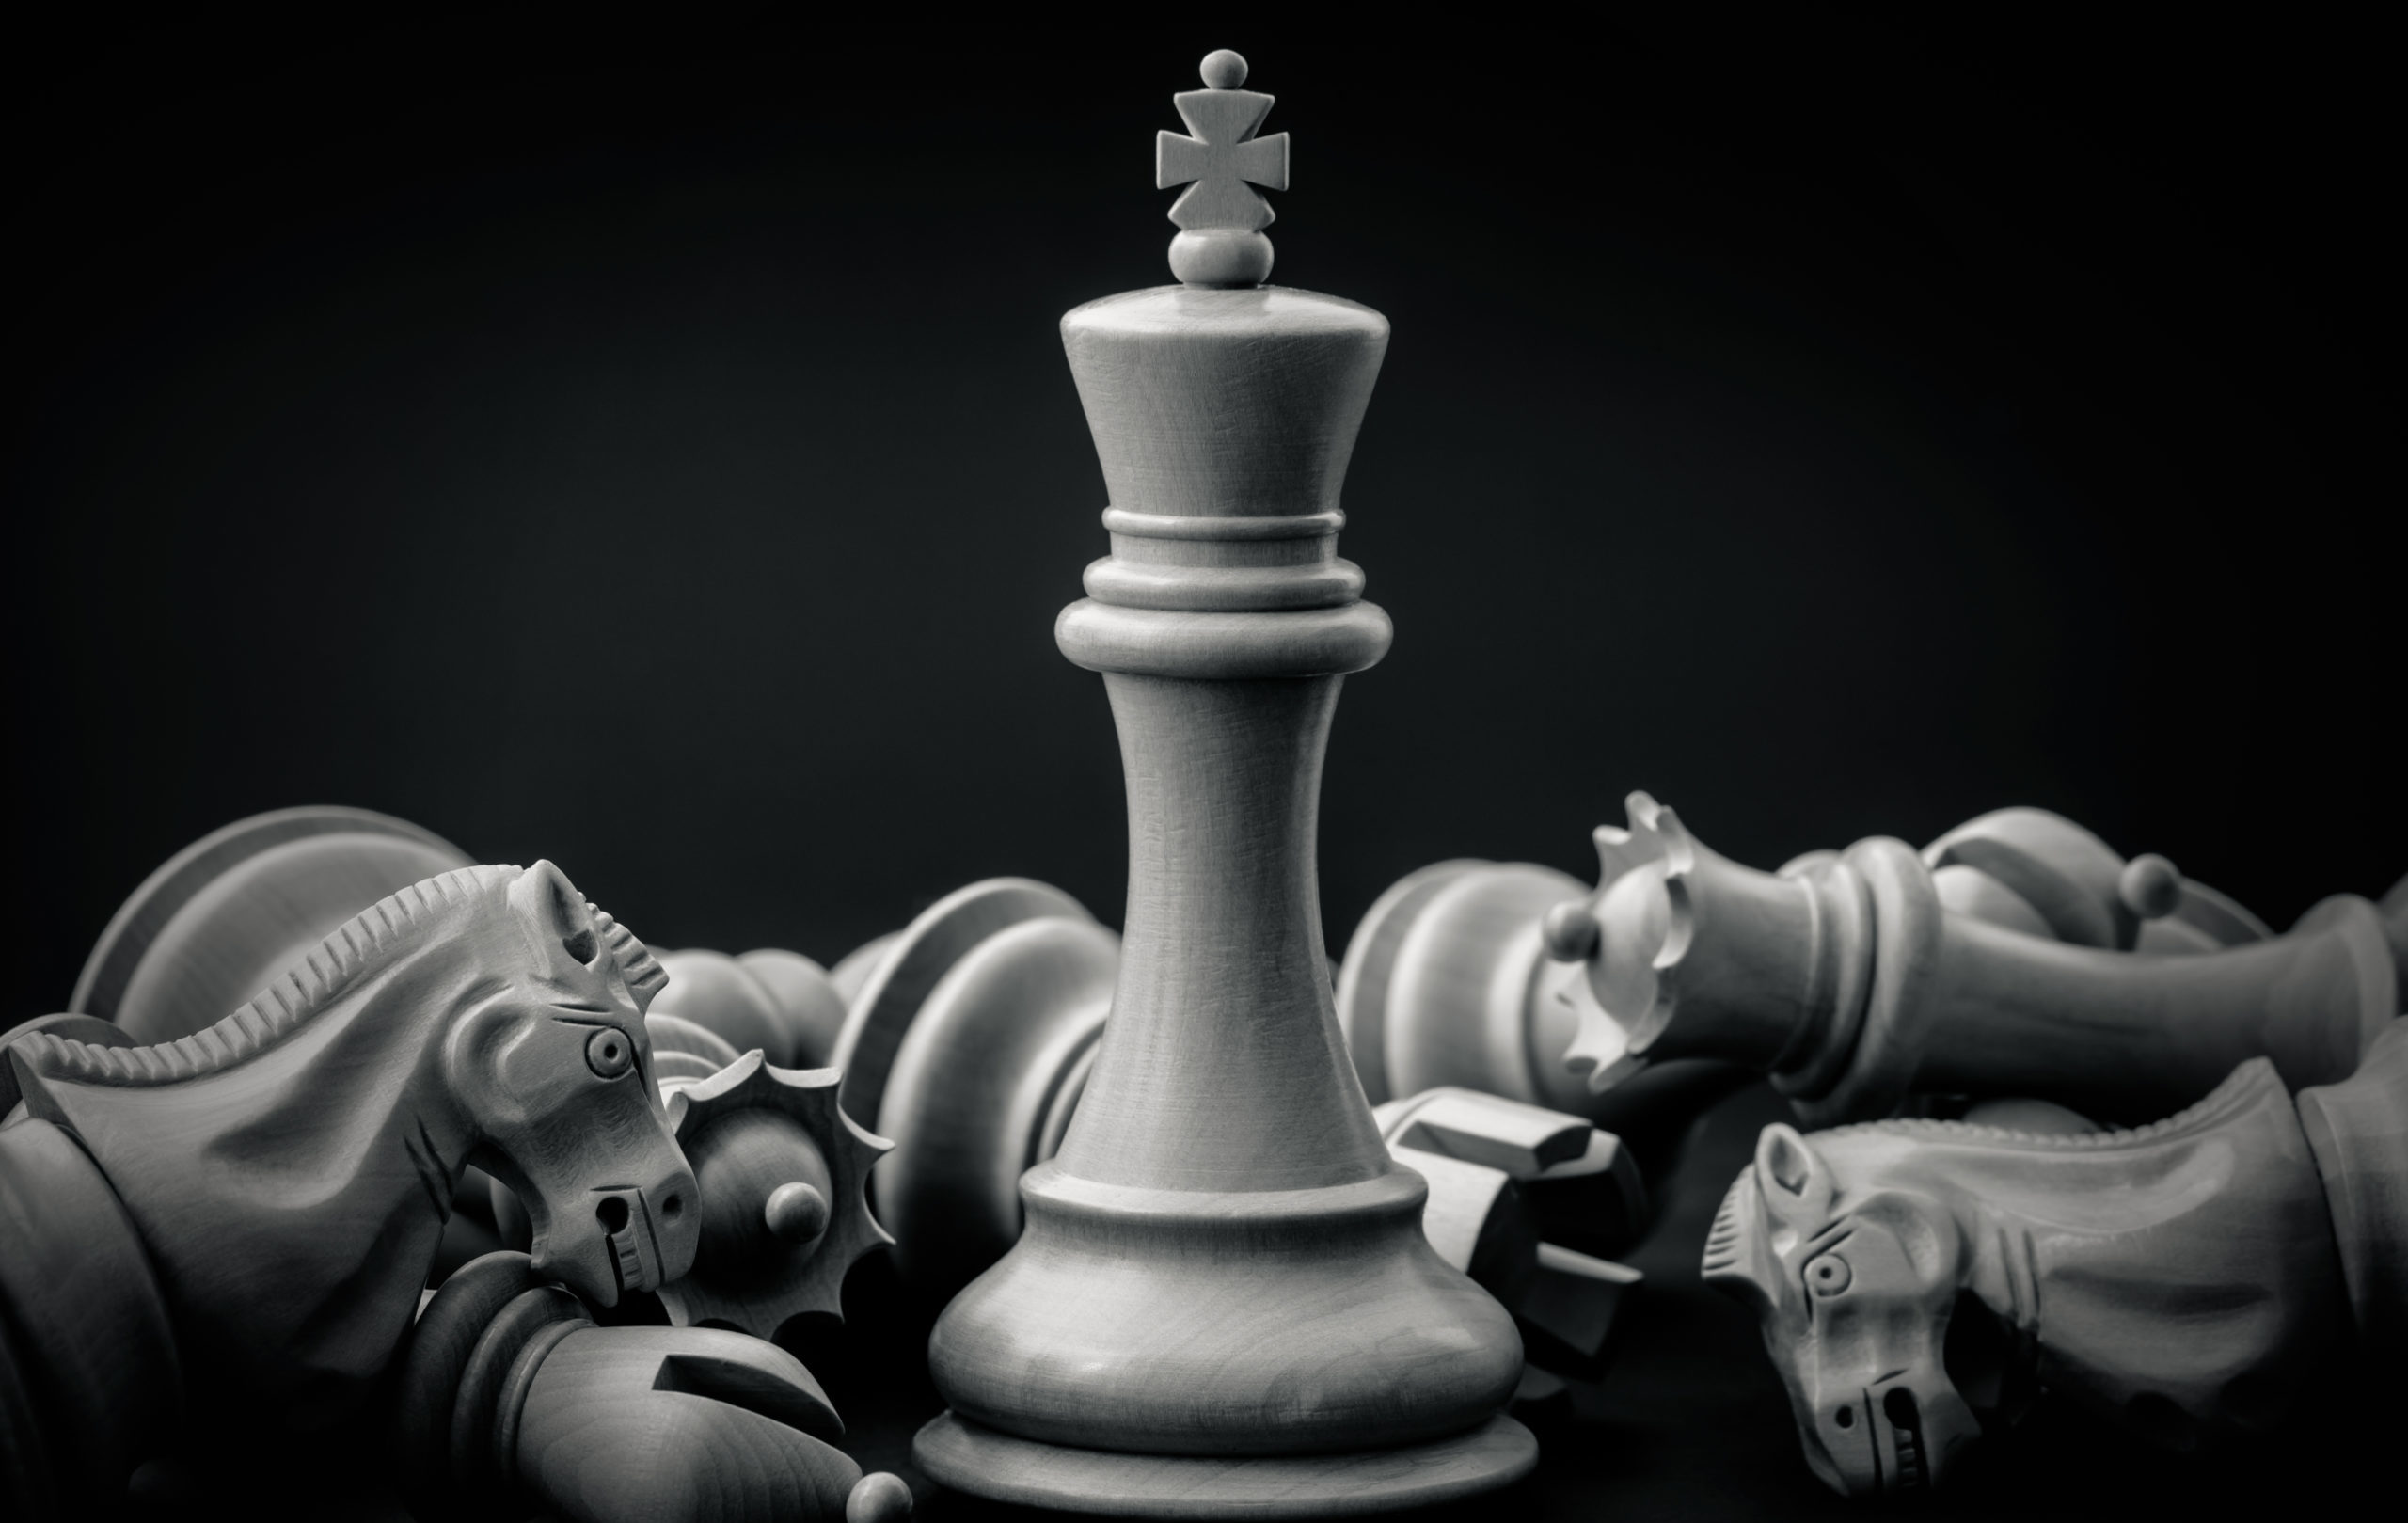 Black,And,White,King,And,Knight,Of,Chess,Setup,On